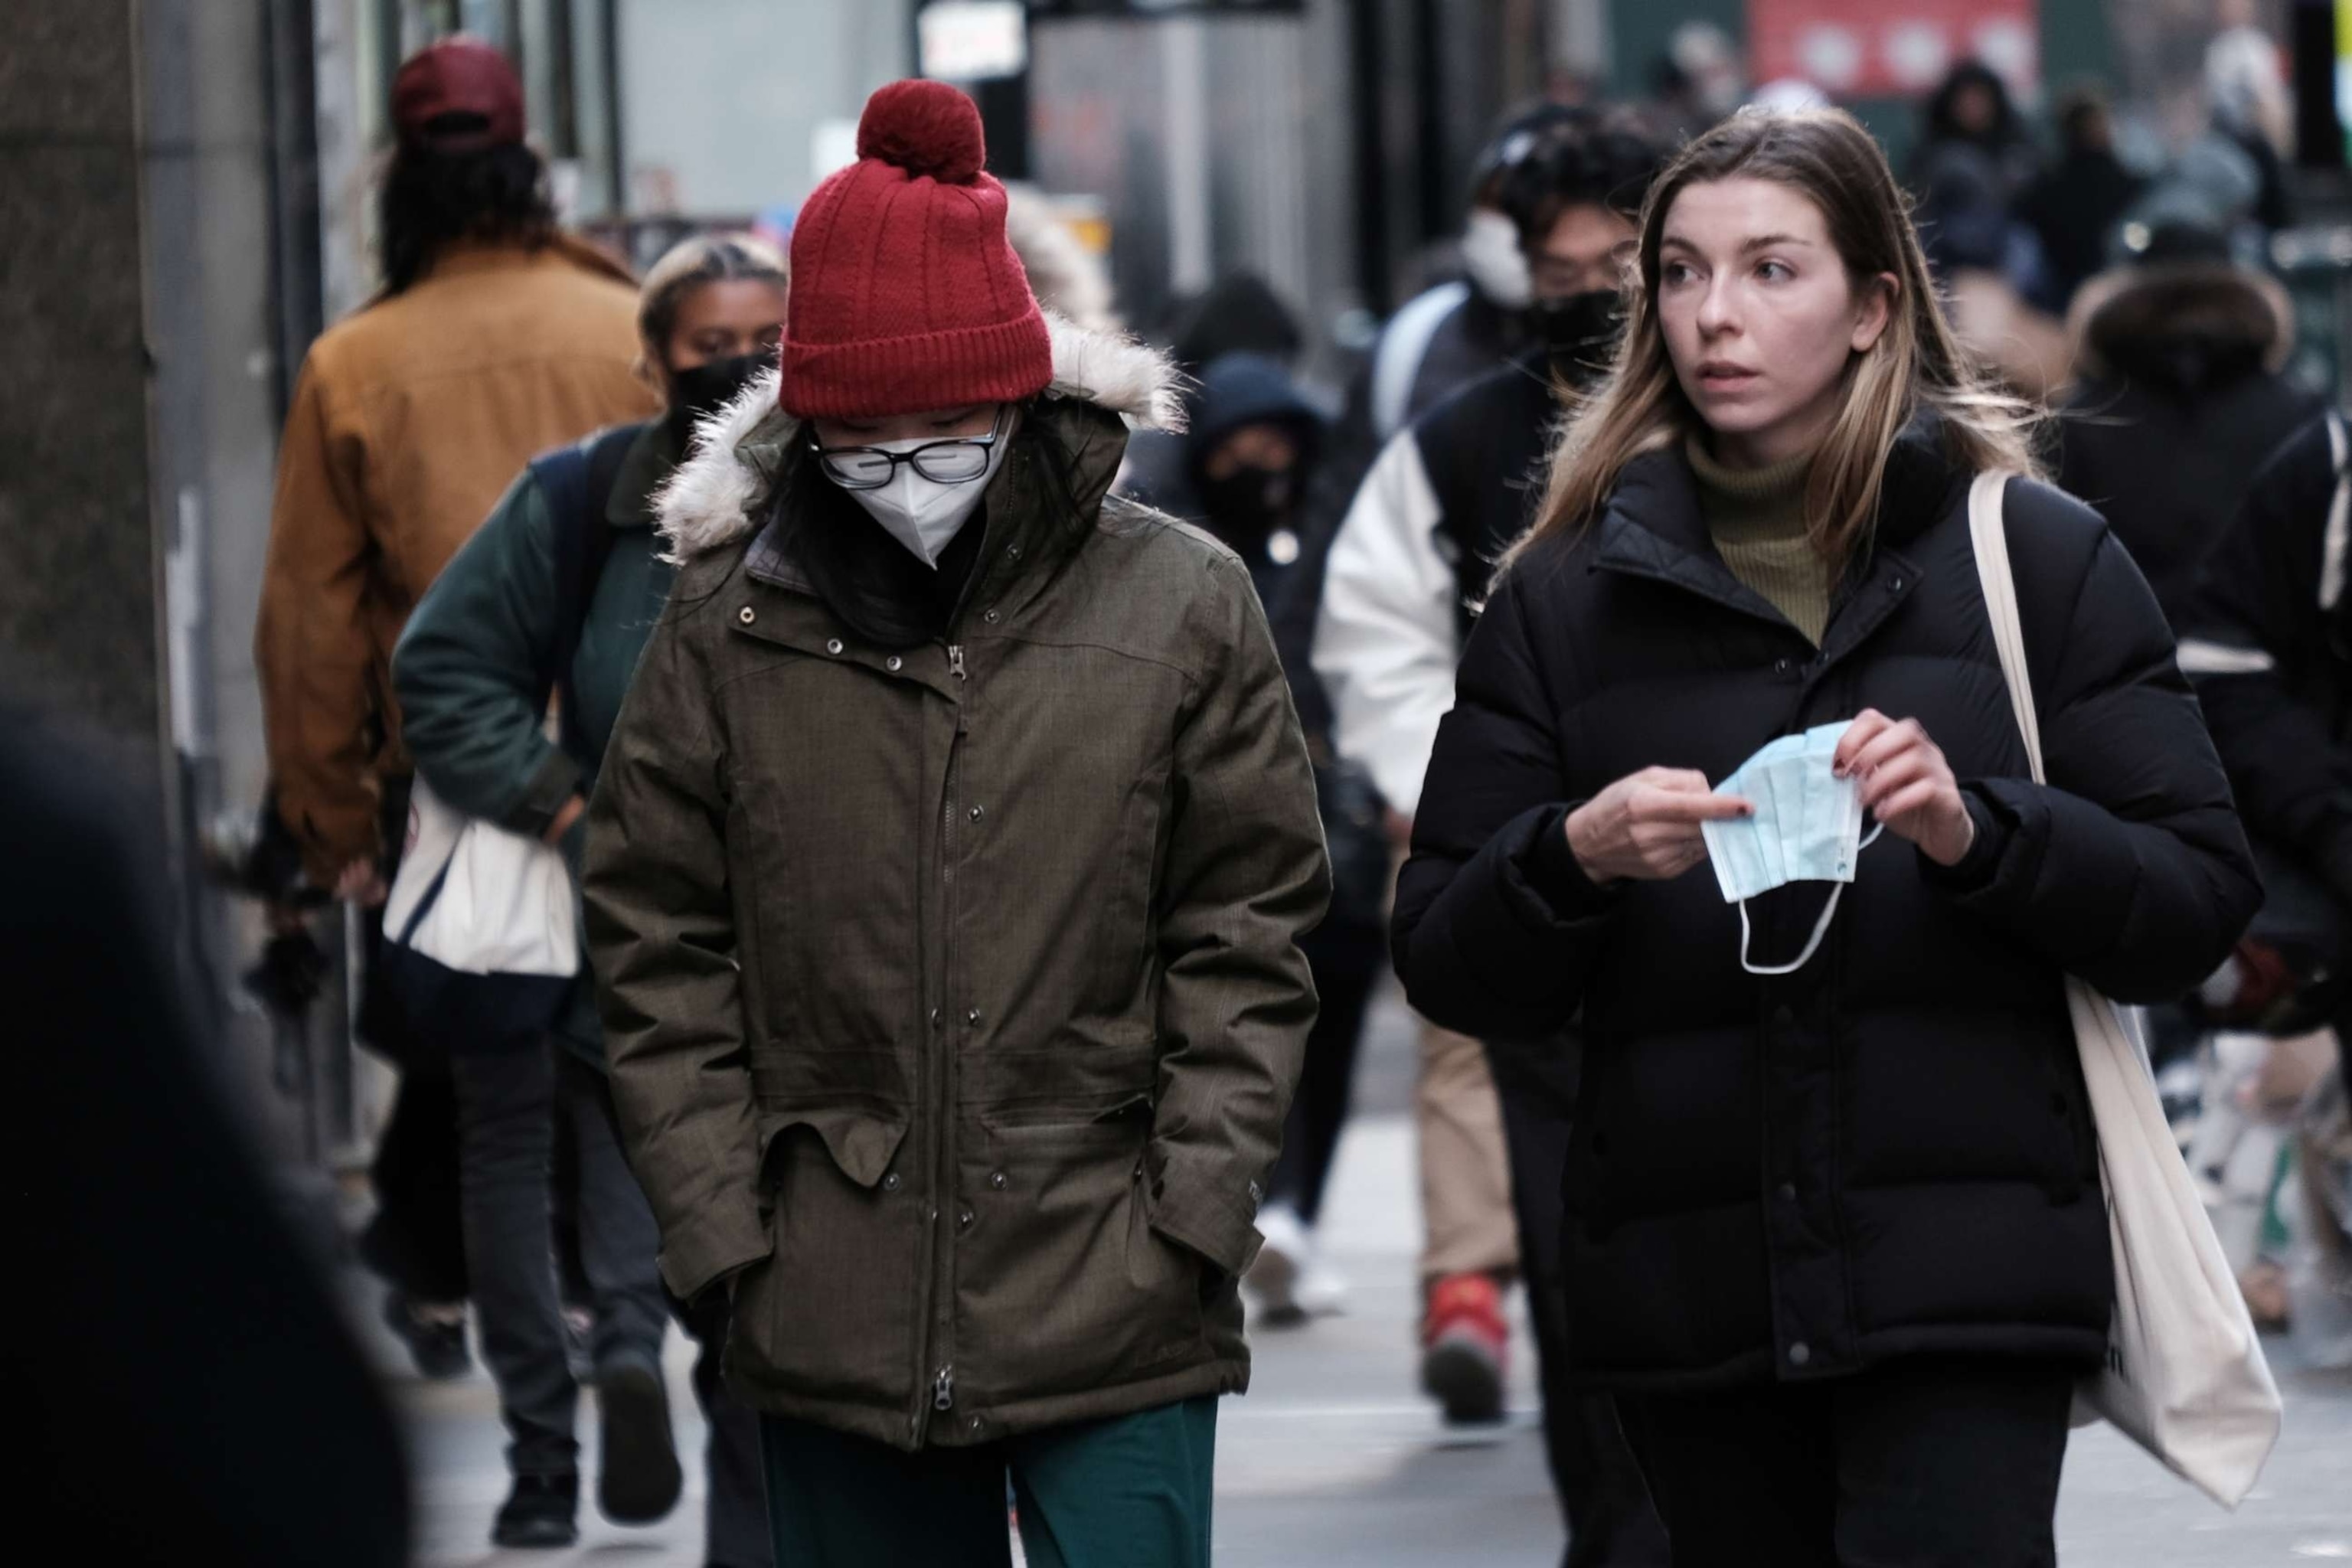 PHOTO: People wear face masks in Manhattan on Nov. 29, 2021 in New York City.